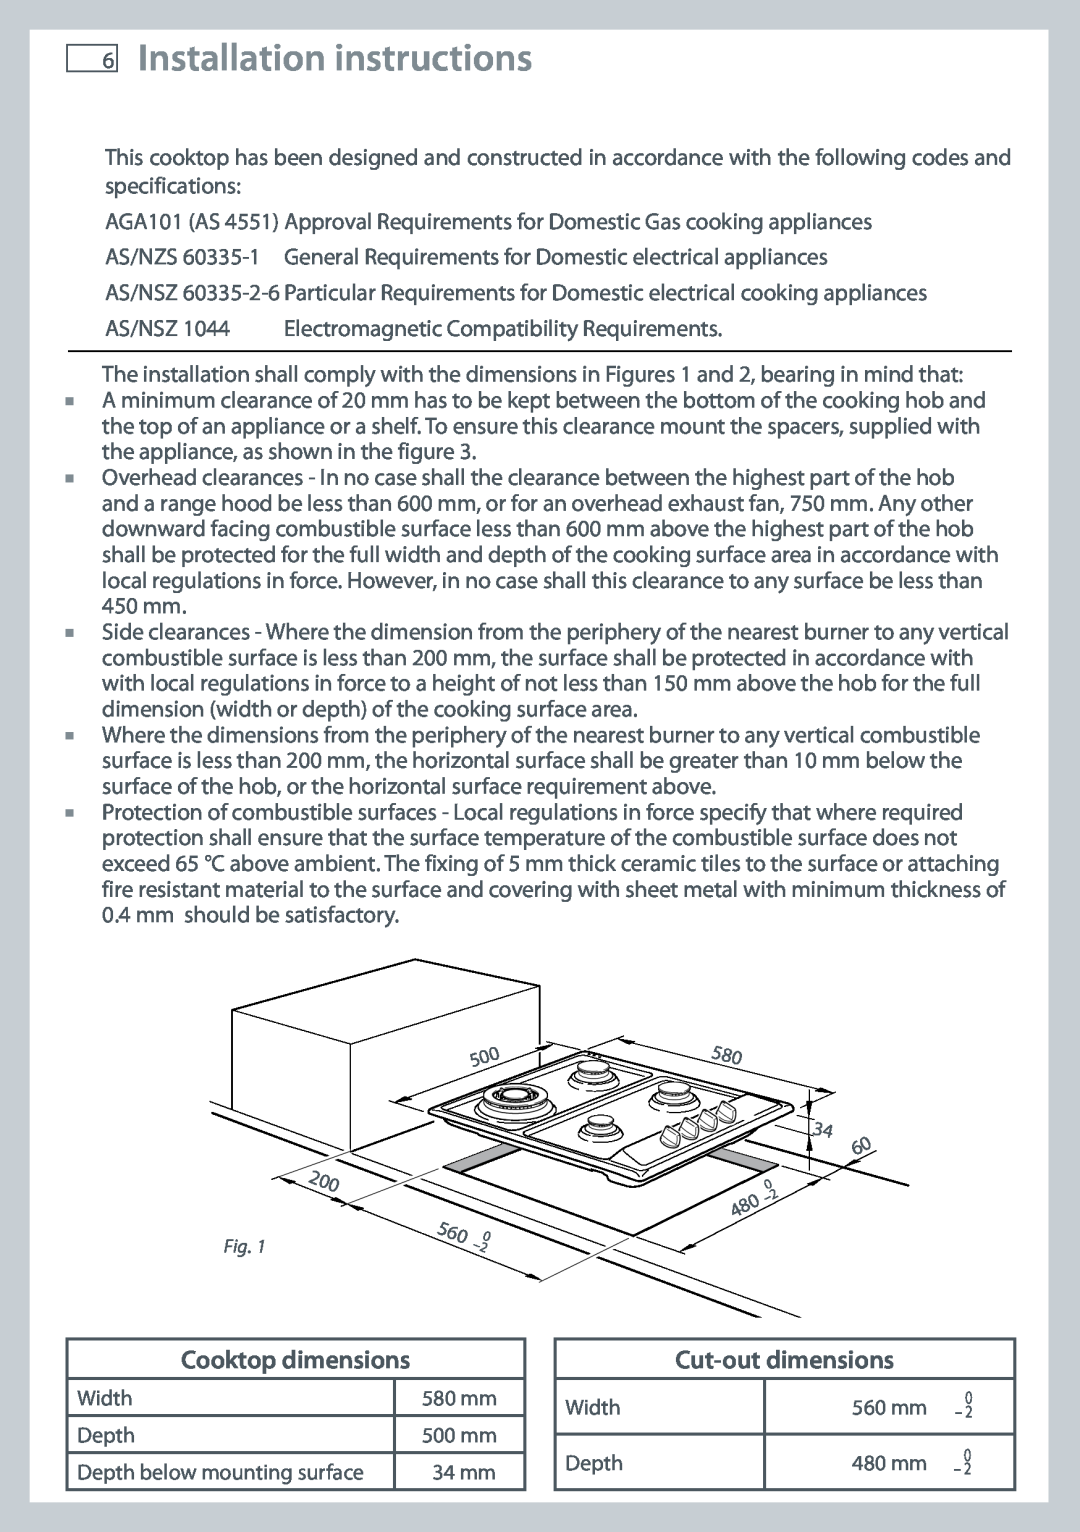 Fisher & Paykel CG604 installation instructions Installation instructions, Cooktop dimensions, Cut-outdimensions 